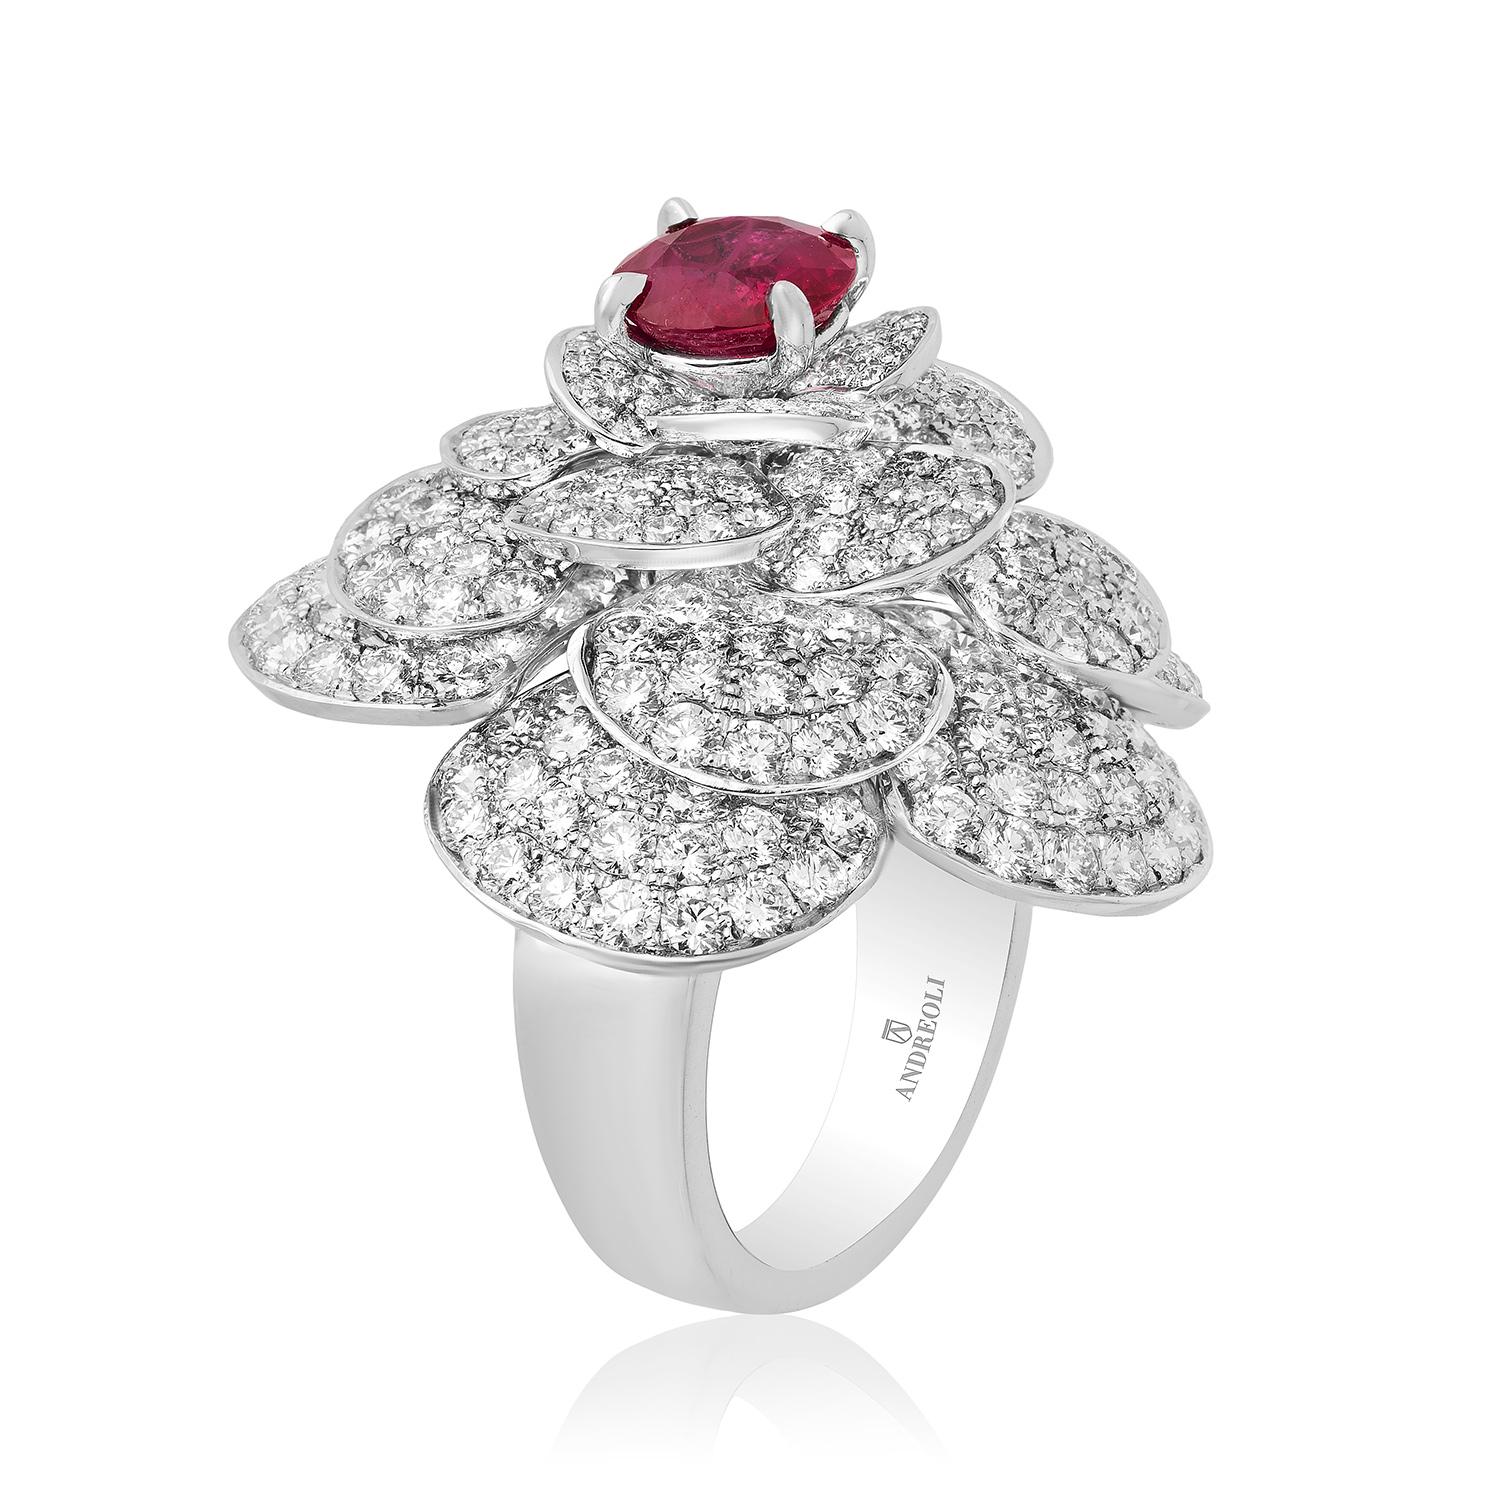 Contemporary Andreoli 1.68 Carat Ruby Diamond 18 Karat White Gold Flower Ring CDC Certified For Sale